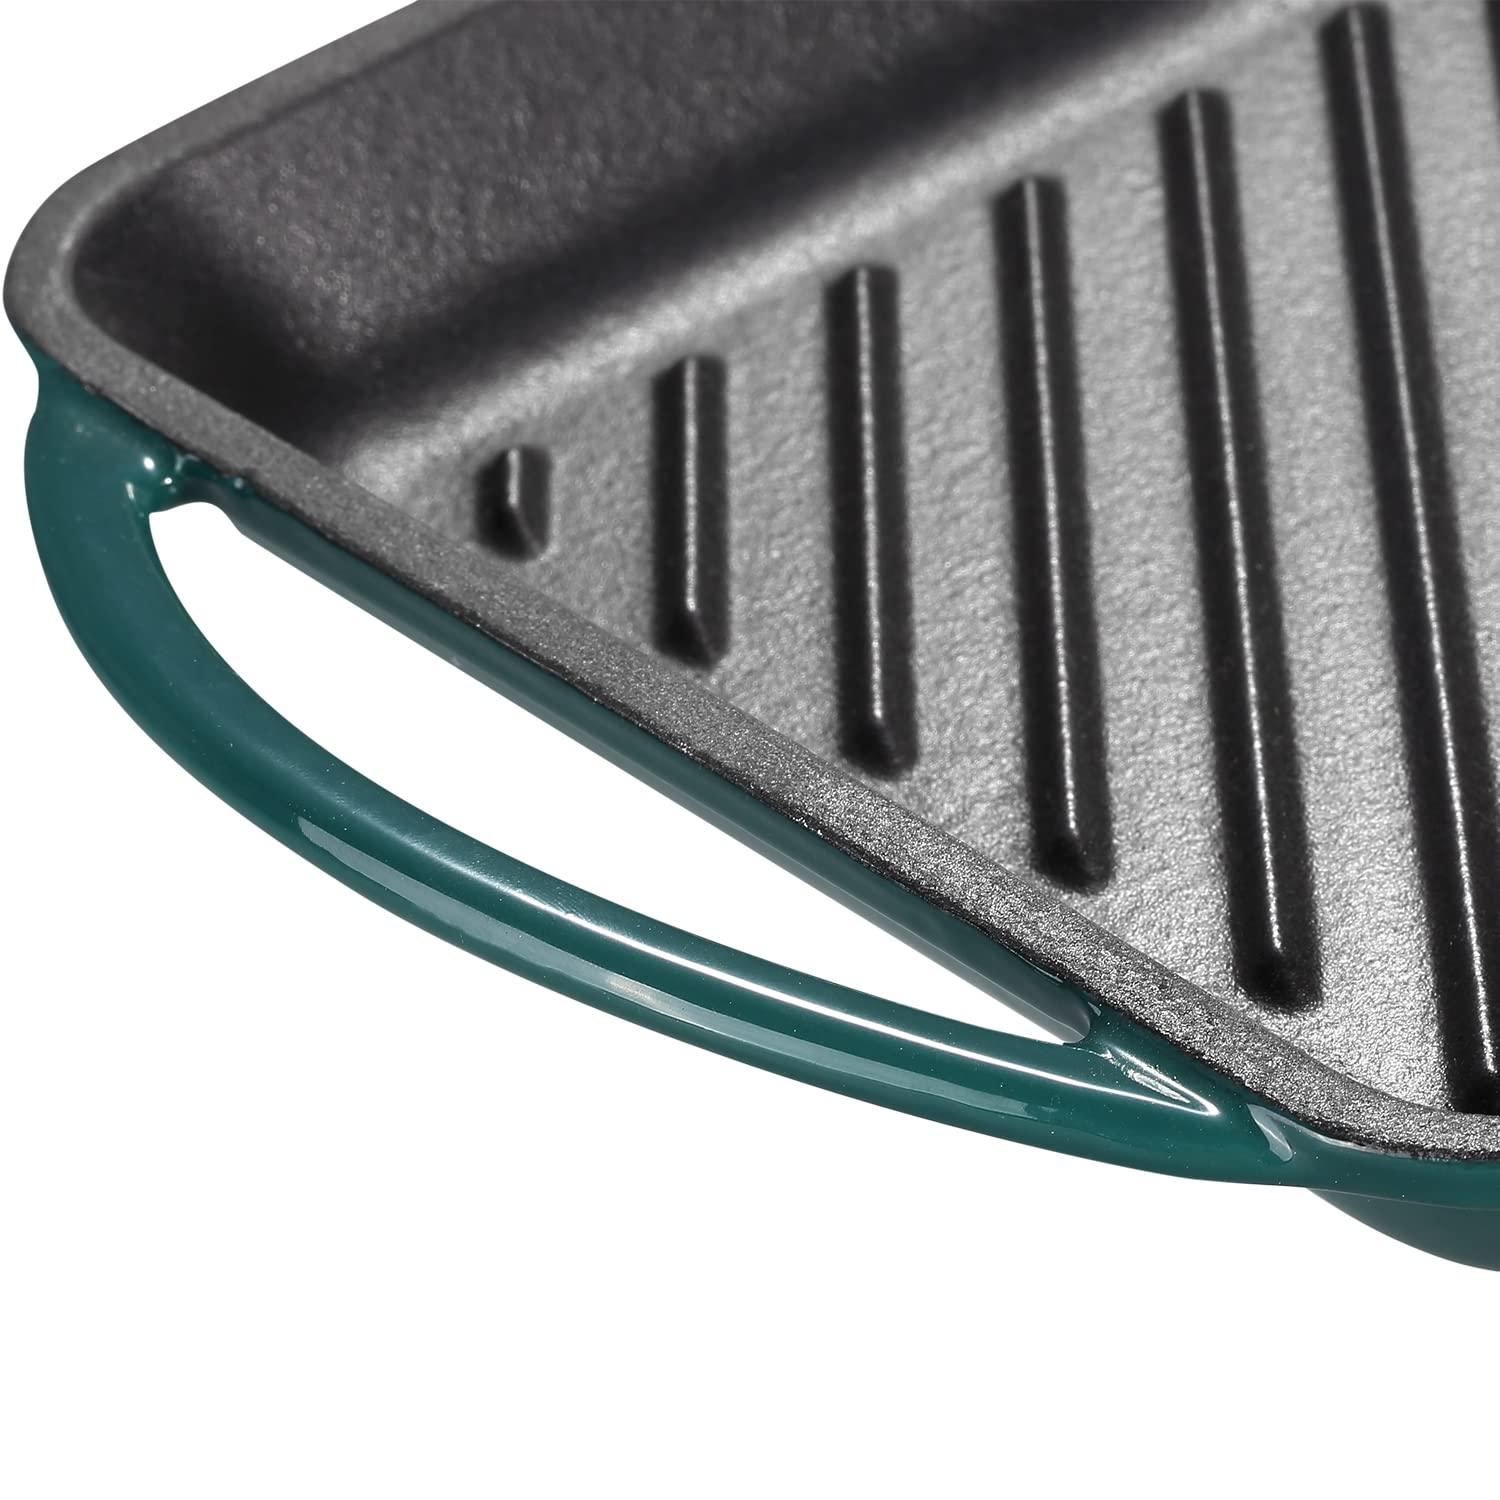 Enameled Cast Iron Grill Pan (Dark Green) - CookCave